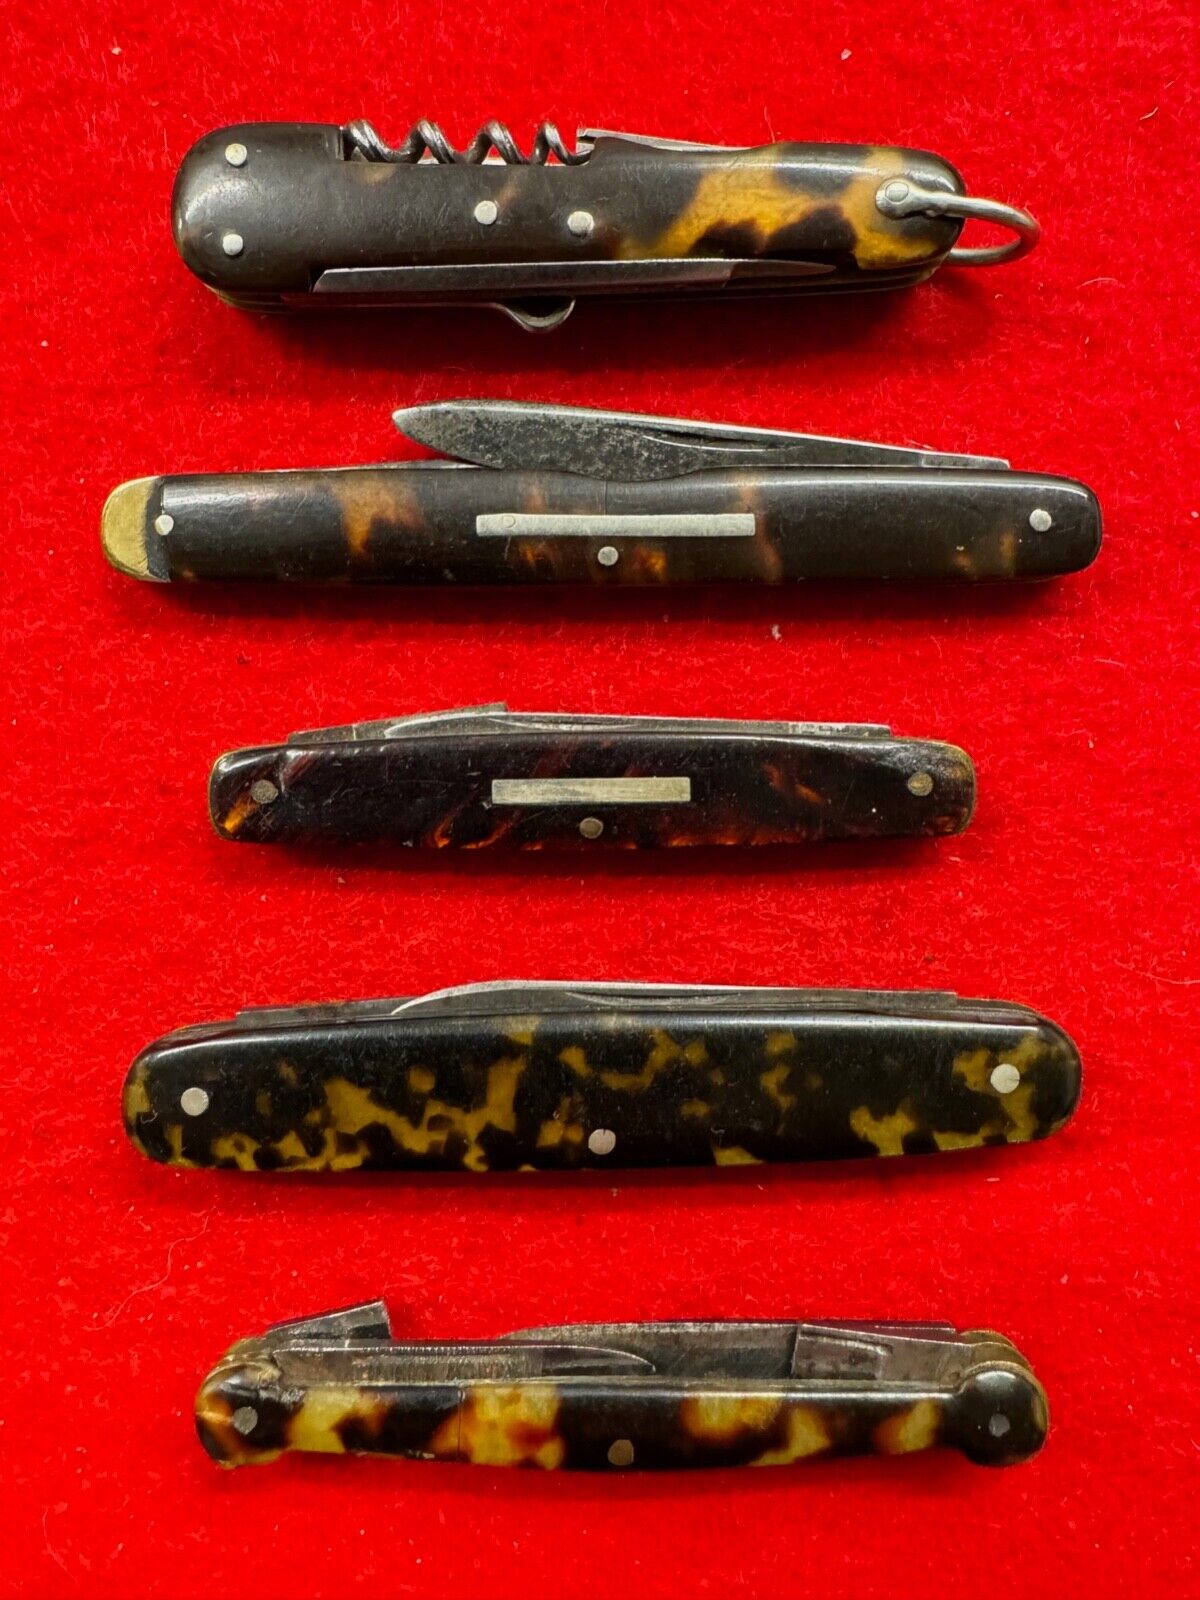 COLLECTION OF 5 RARE VINTAGE & ANTIQUE “ACETATE” KNIVES - REPAIR OR PARTS  (773)